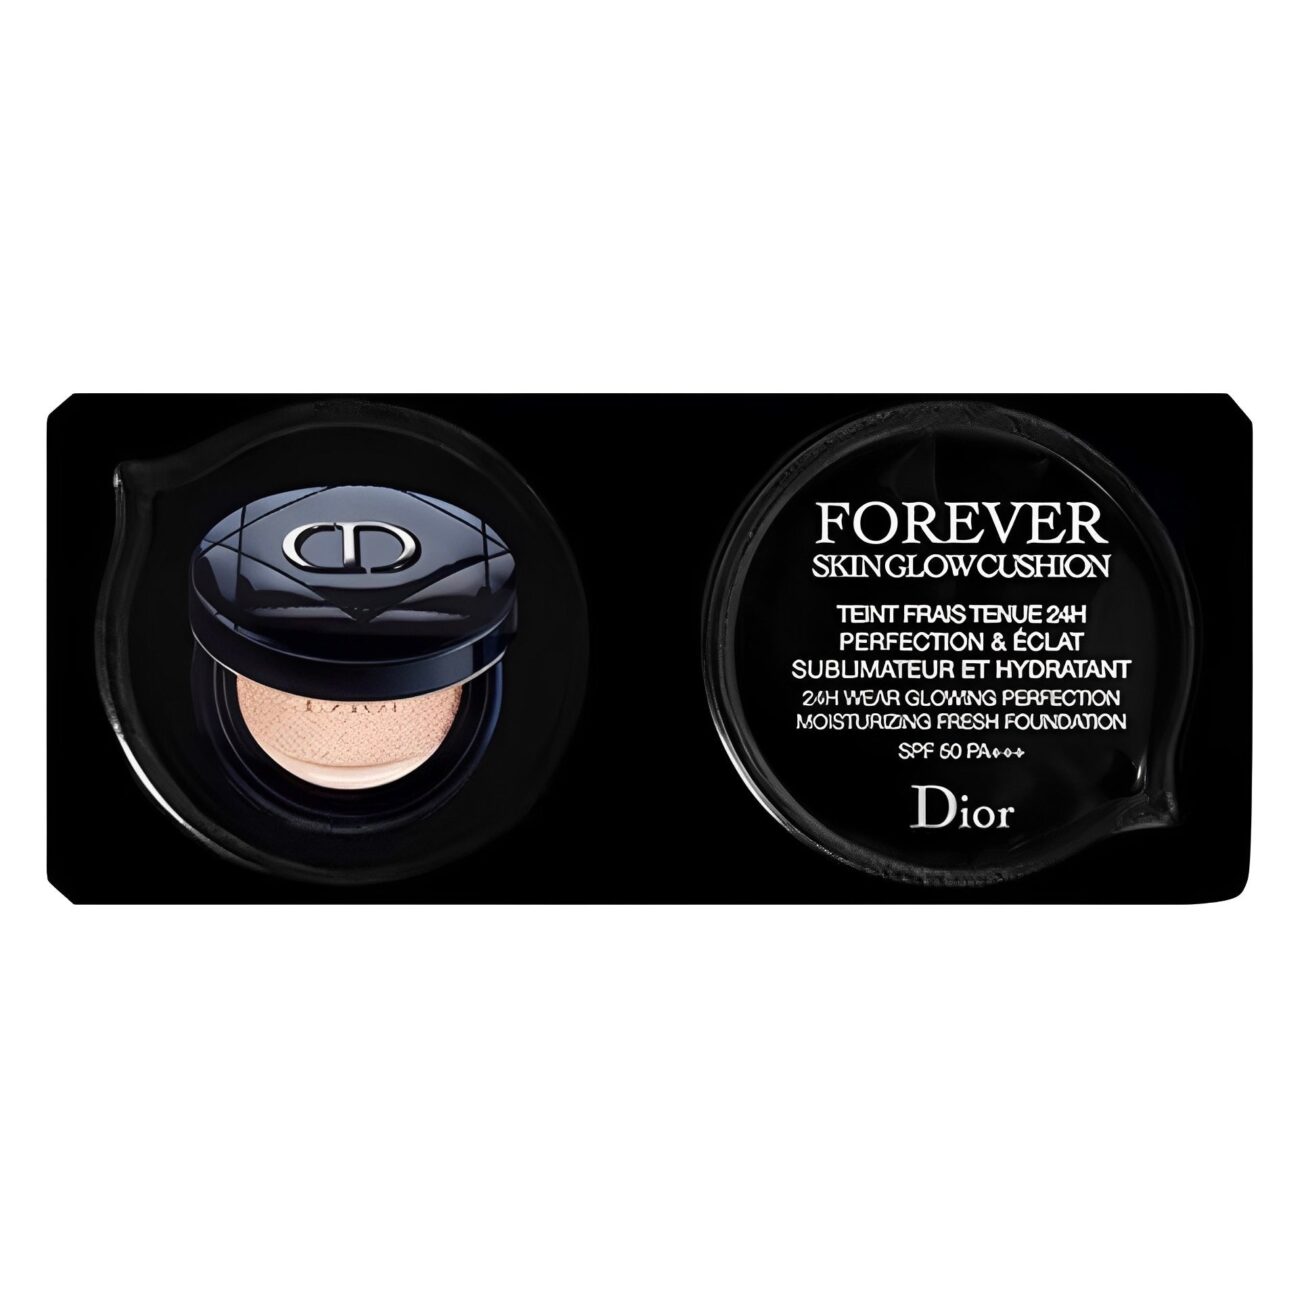 Forever Couture Perfect Cushion trial size - 0N-DIOR